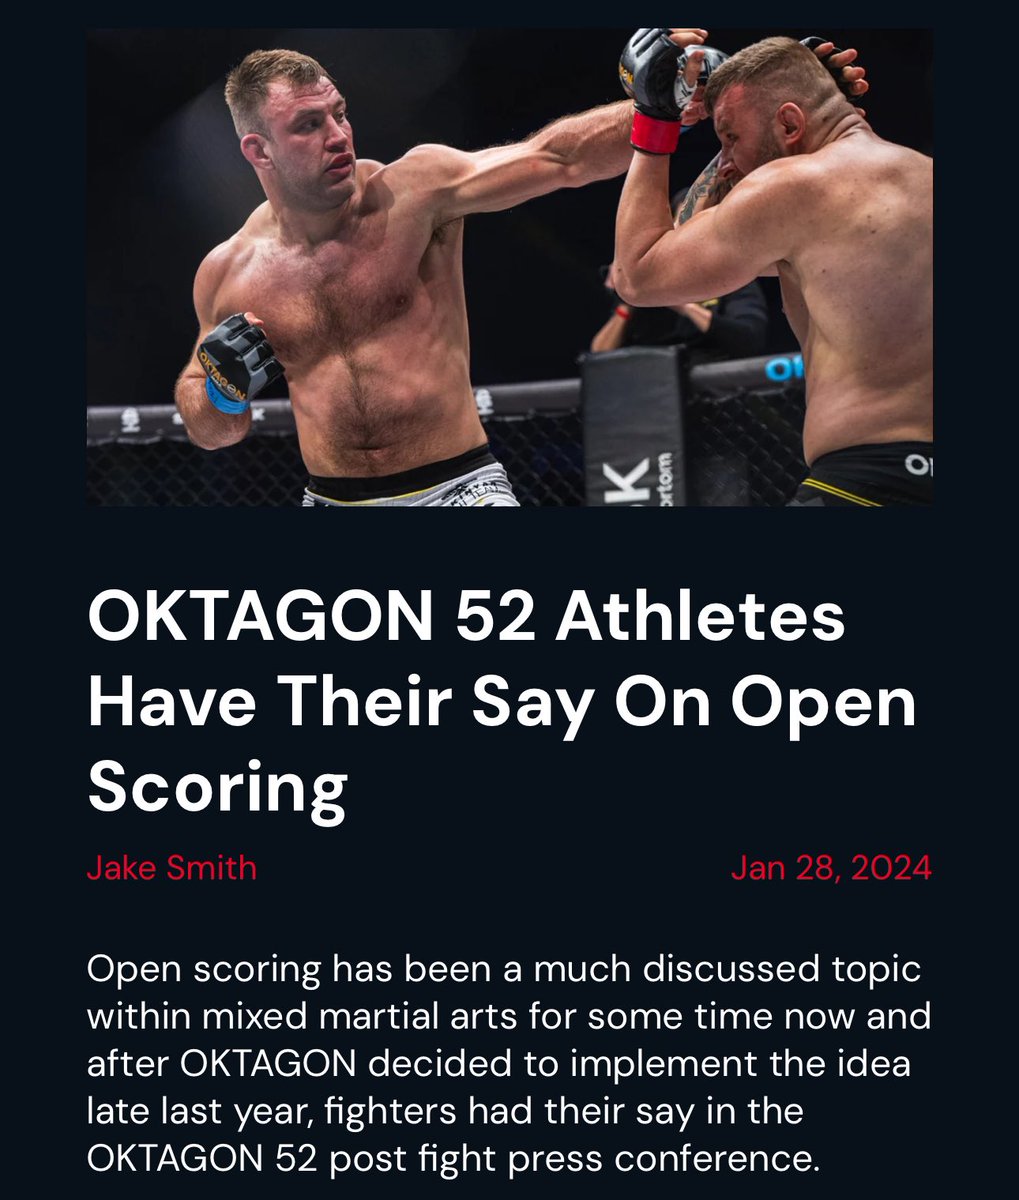 We brought MMA open scoring to UK 🇬🇧 and this is what fighters think about it. 

How you fans like it? 

fightersonly.com/article/ext/85…